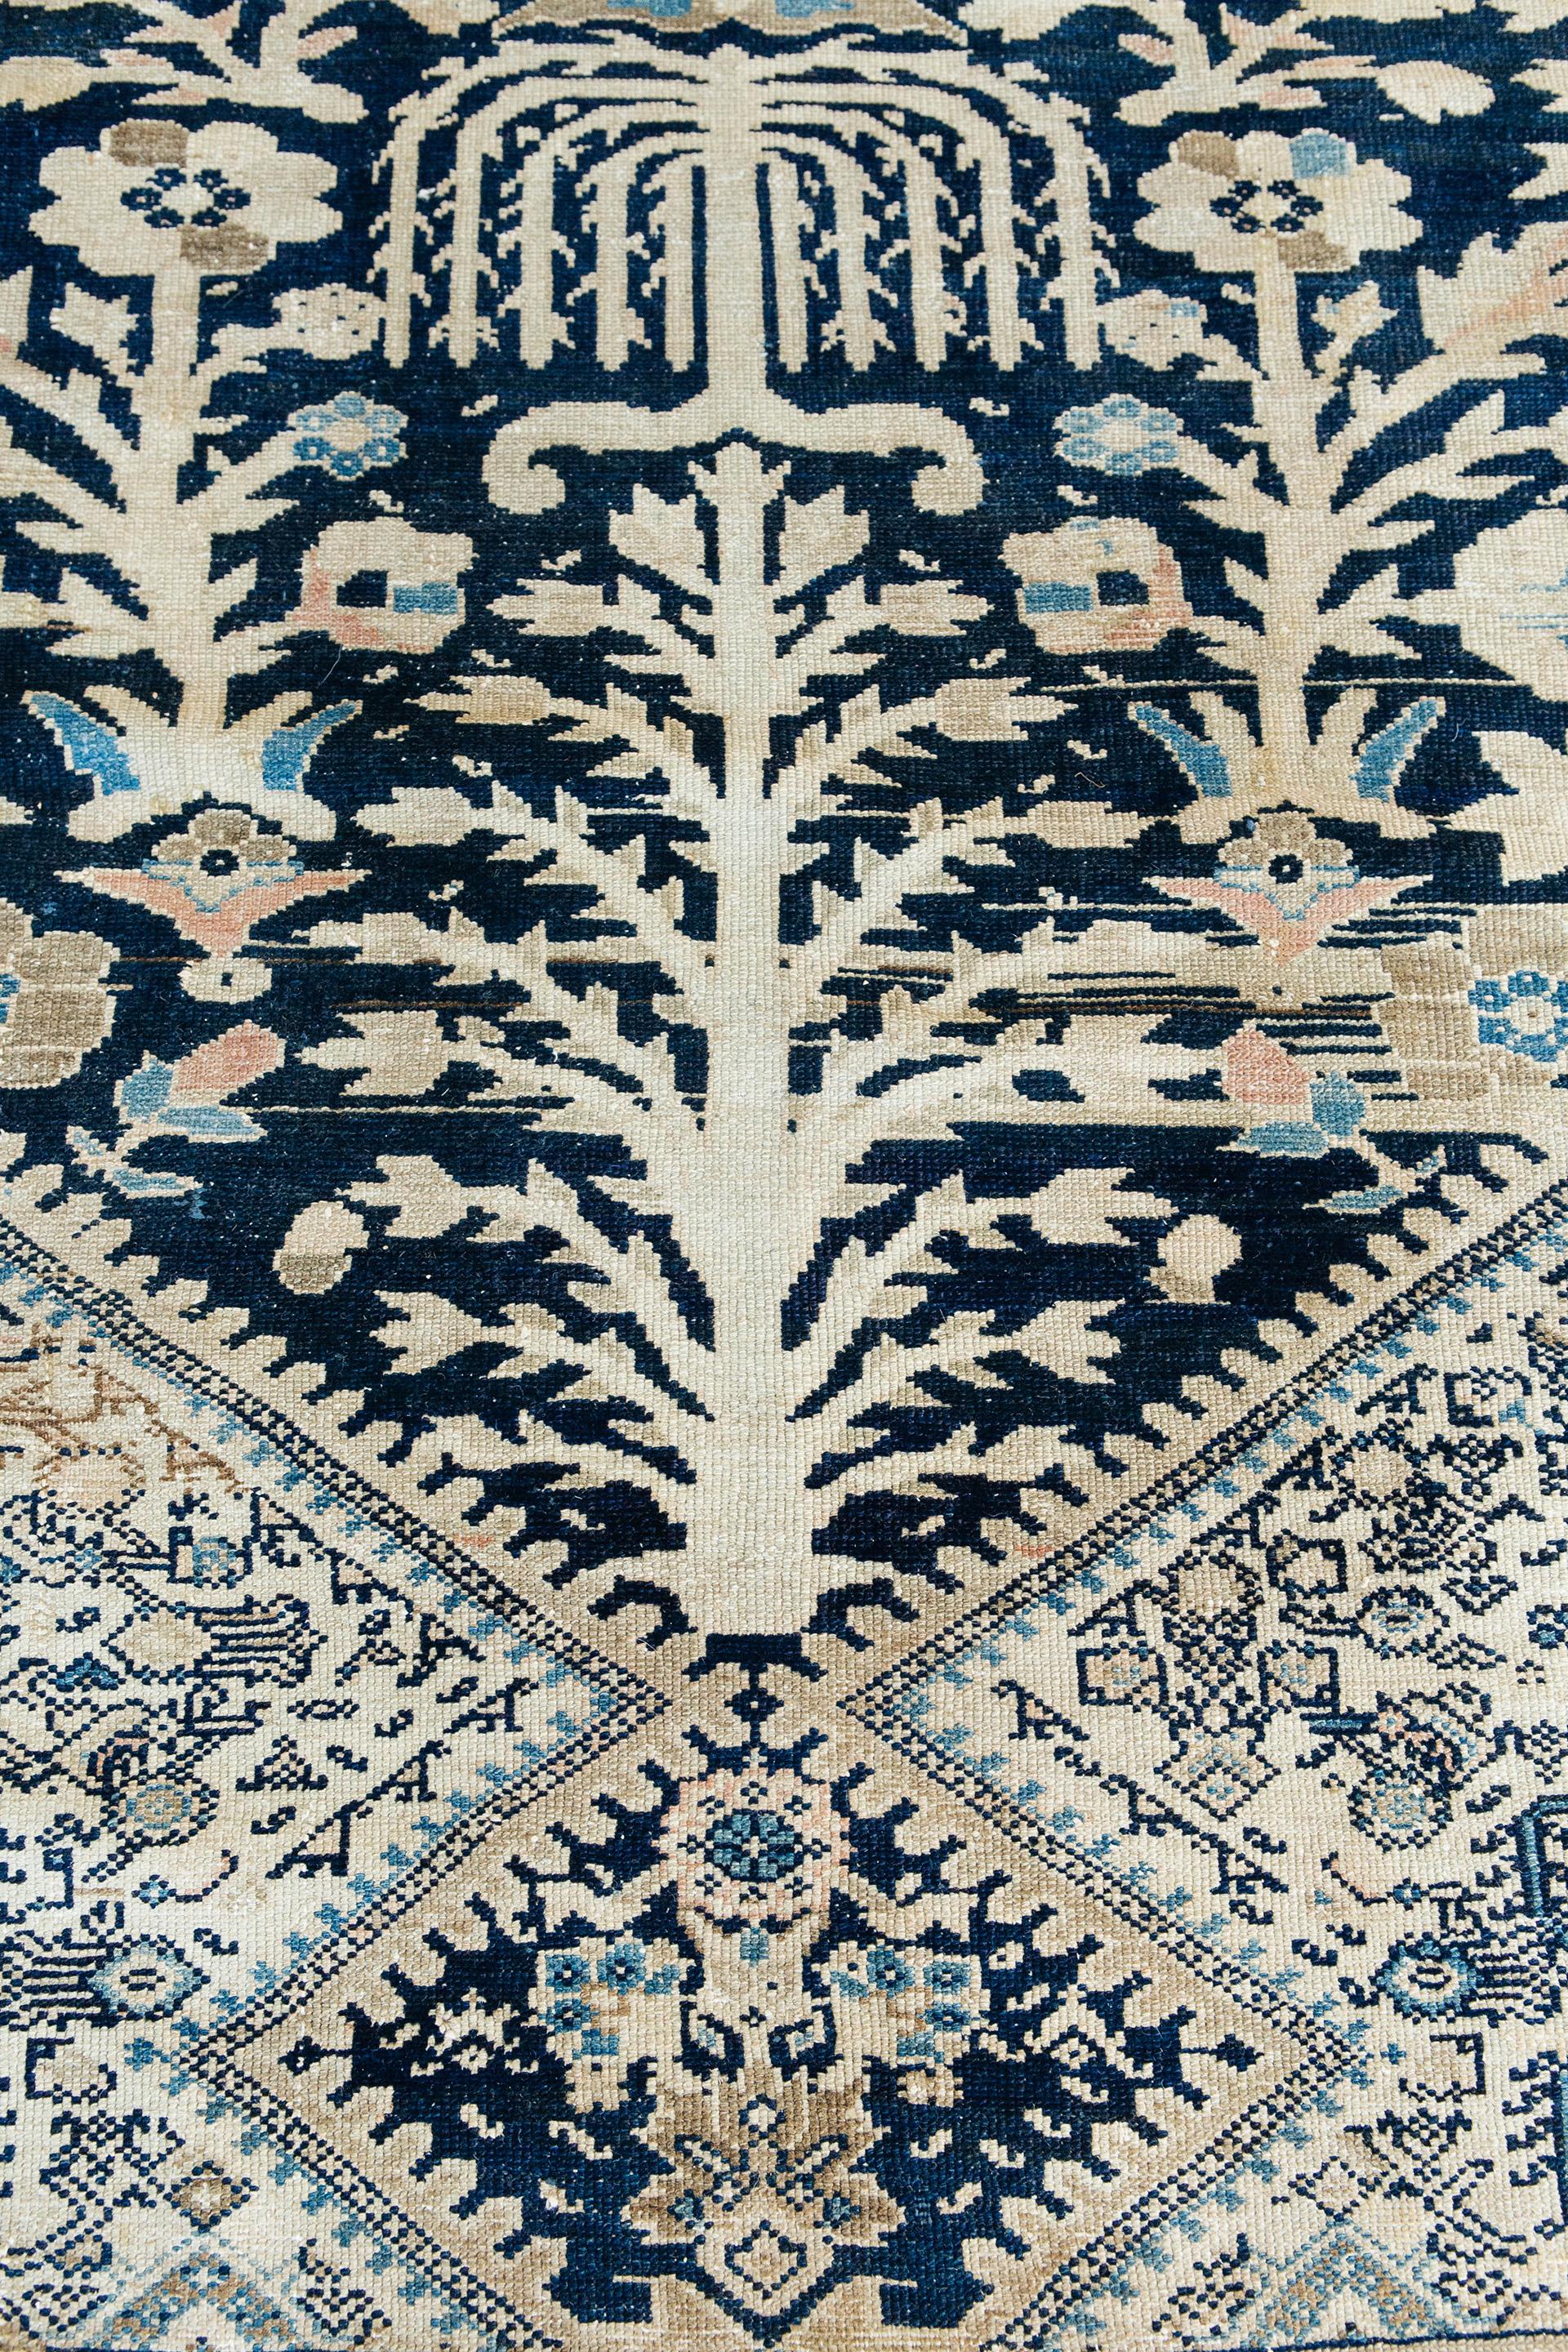 Blue handwoven Persian Malayer rug from Iran, circa late 19th century. Authentically antique piece constructed out of wool and pile weave method with floral and traditional design motifs.

Rug number: 26383
Size: 11'10